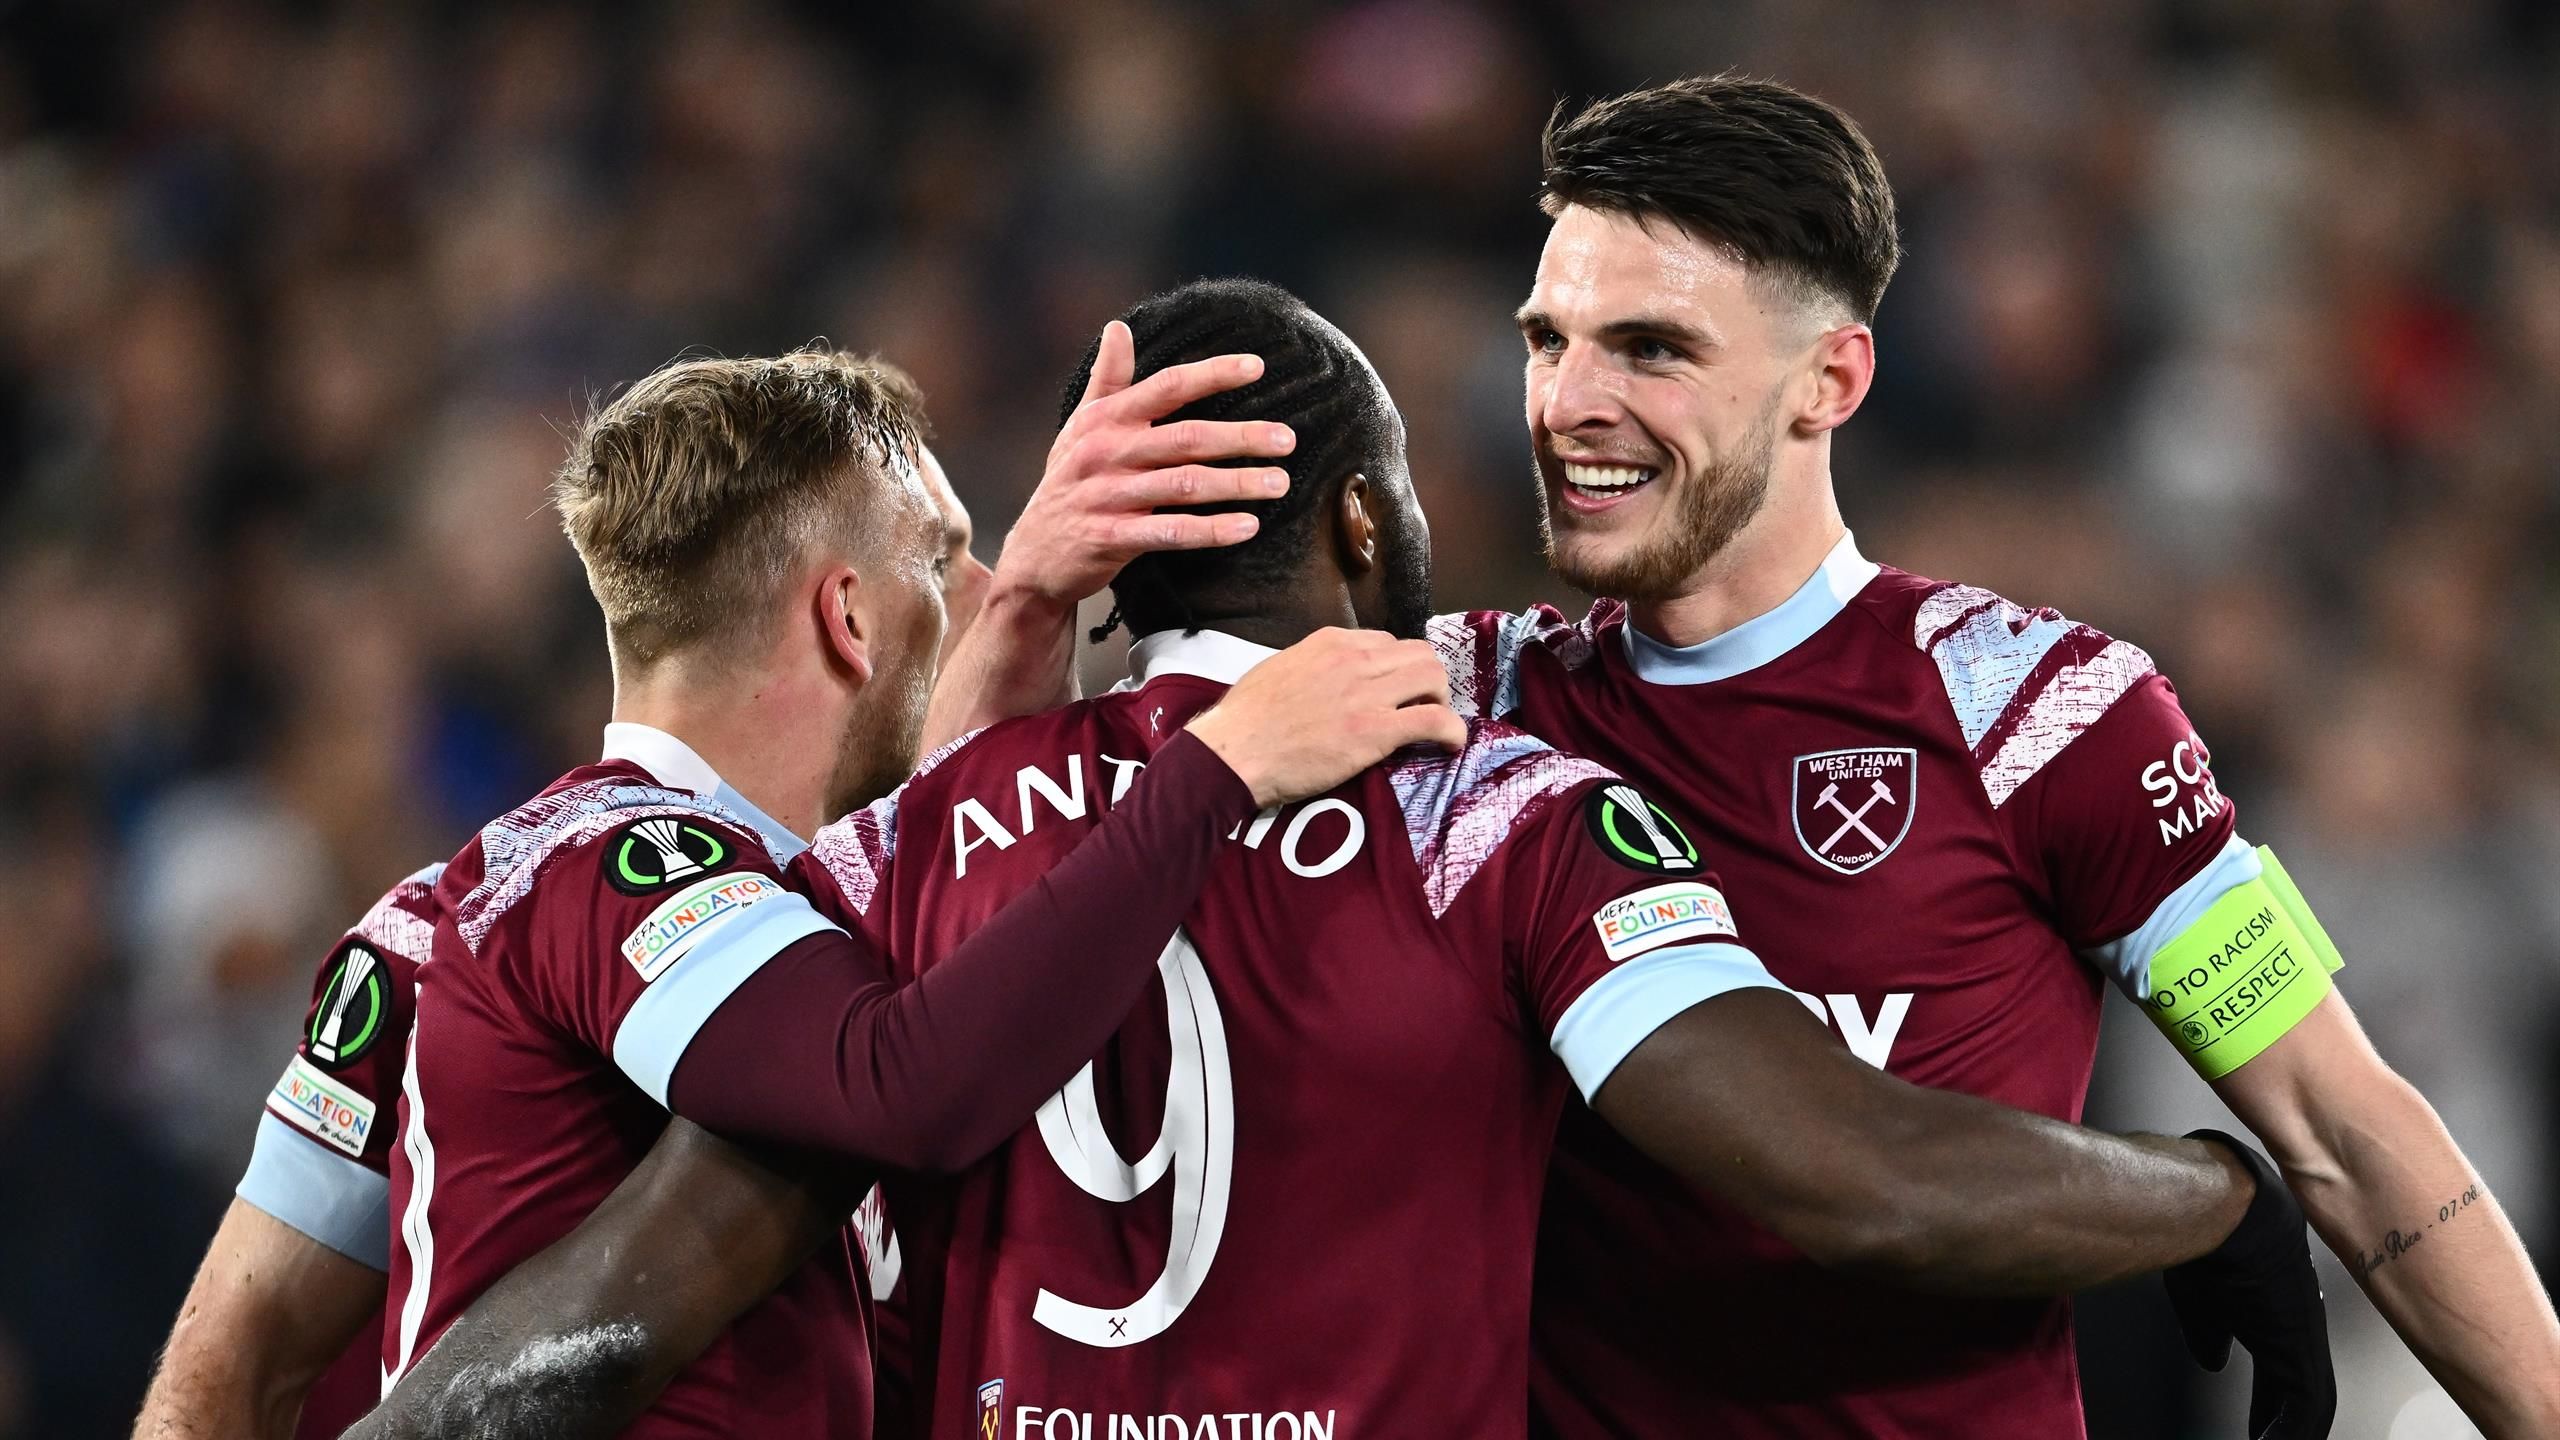 Fiorentina v West Ham How to watch Europa Conference League final, TV channel, live stream details, kick-off time